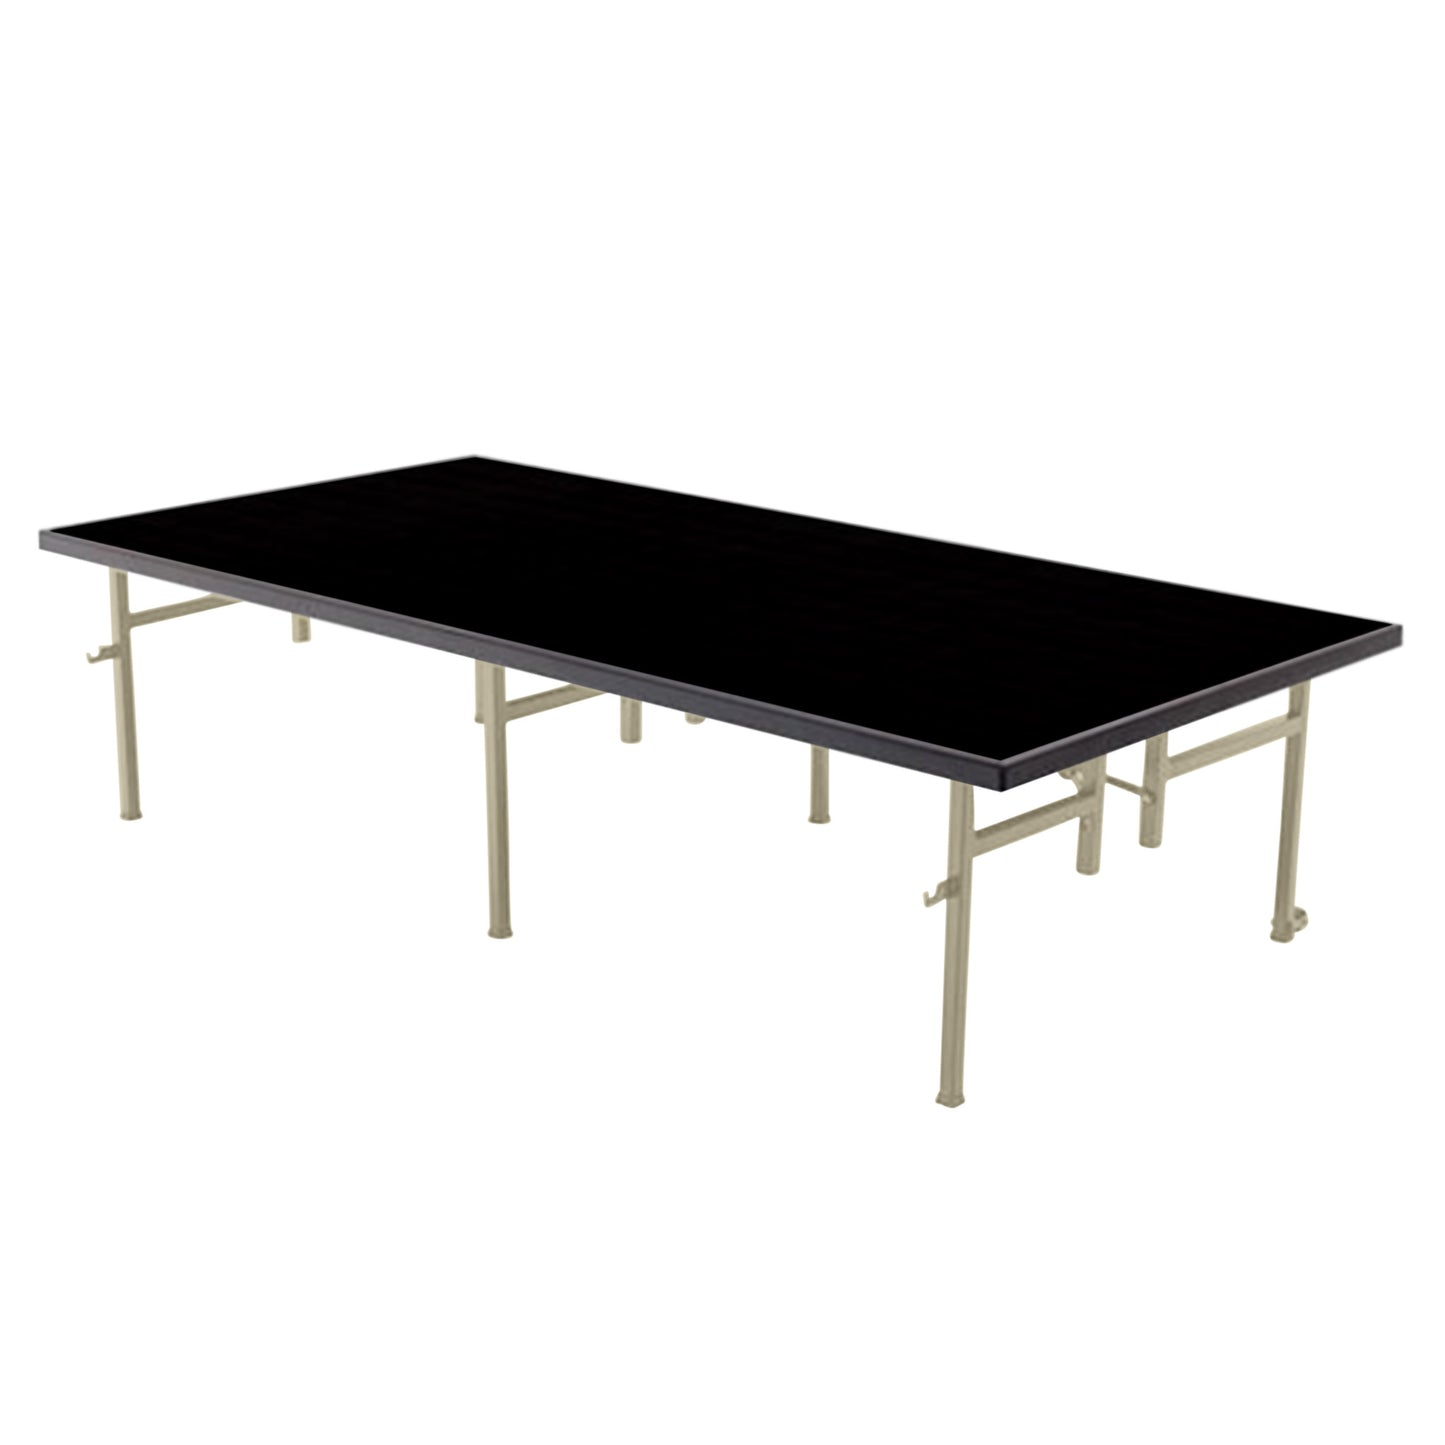 AmTab Fixed Height Stage - Polypropylene Top - 48"W x 96"L x 32"H  (AmTab AMT-ST4832P)